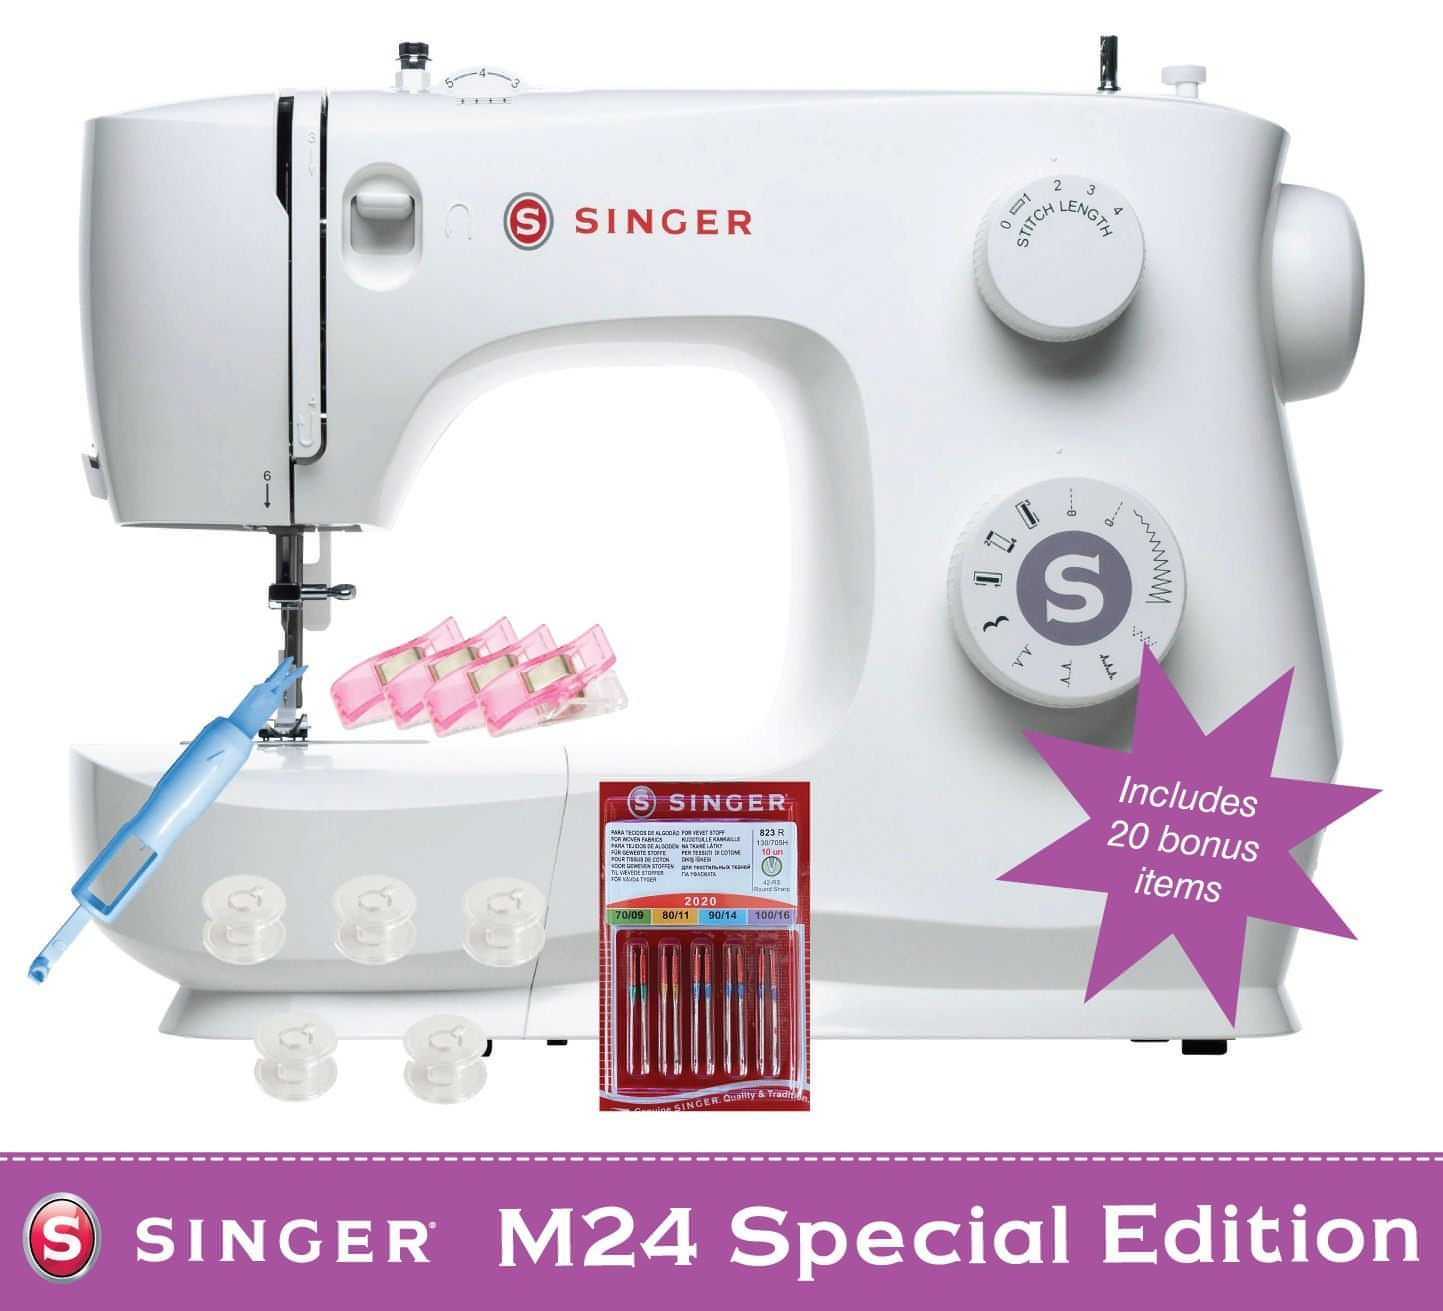 Singer M2405 Sewing Machine with Accessory Bundle FREE Gift